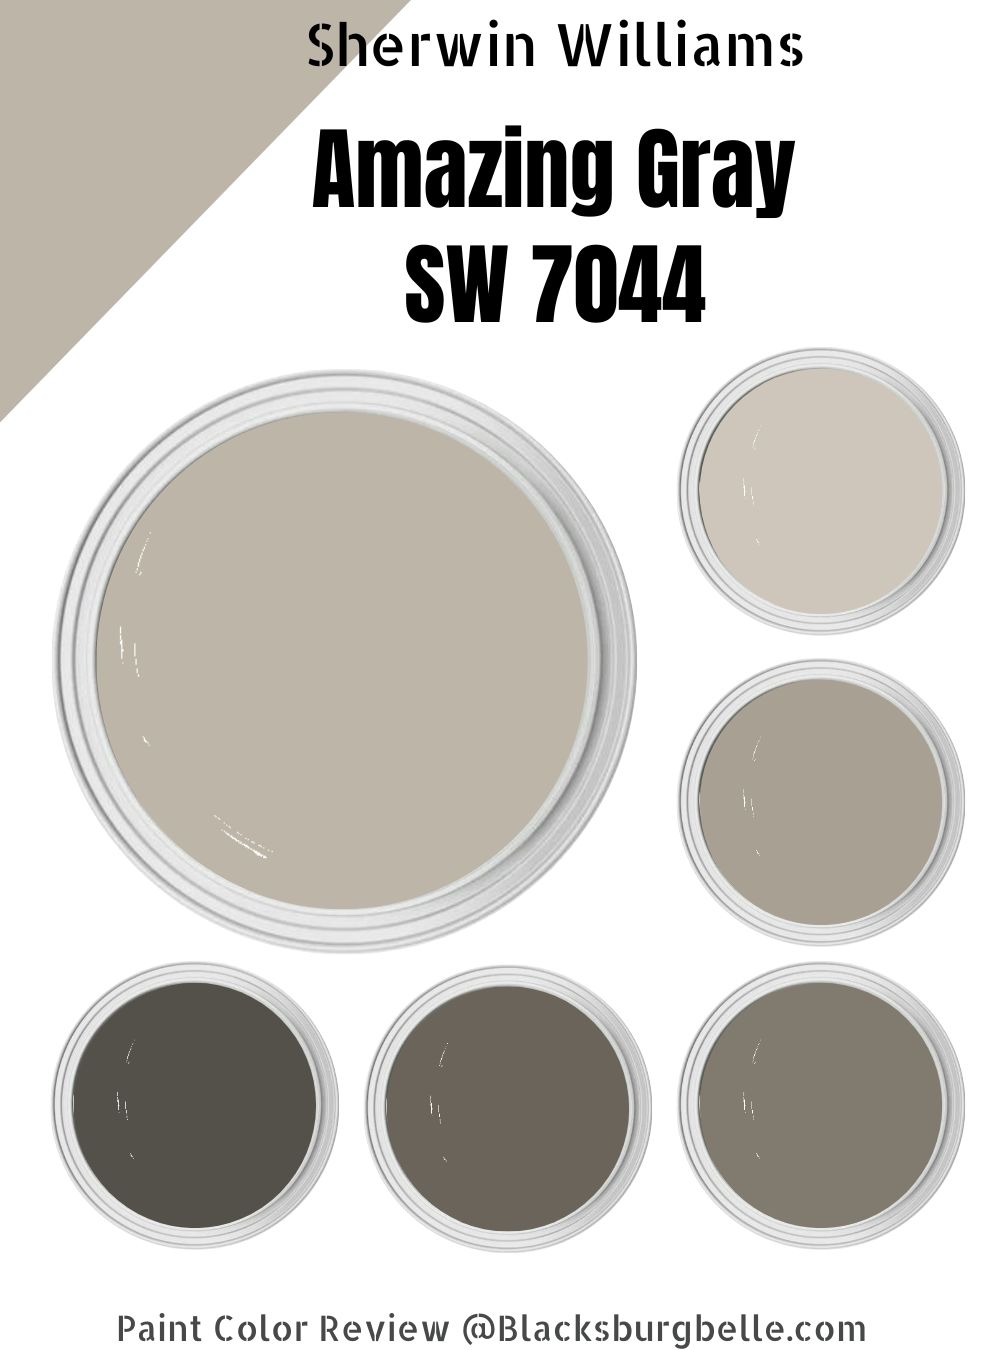 Sherwin Williams Amazing Gray (SW 7044) Paint Color Review